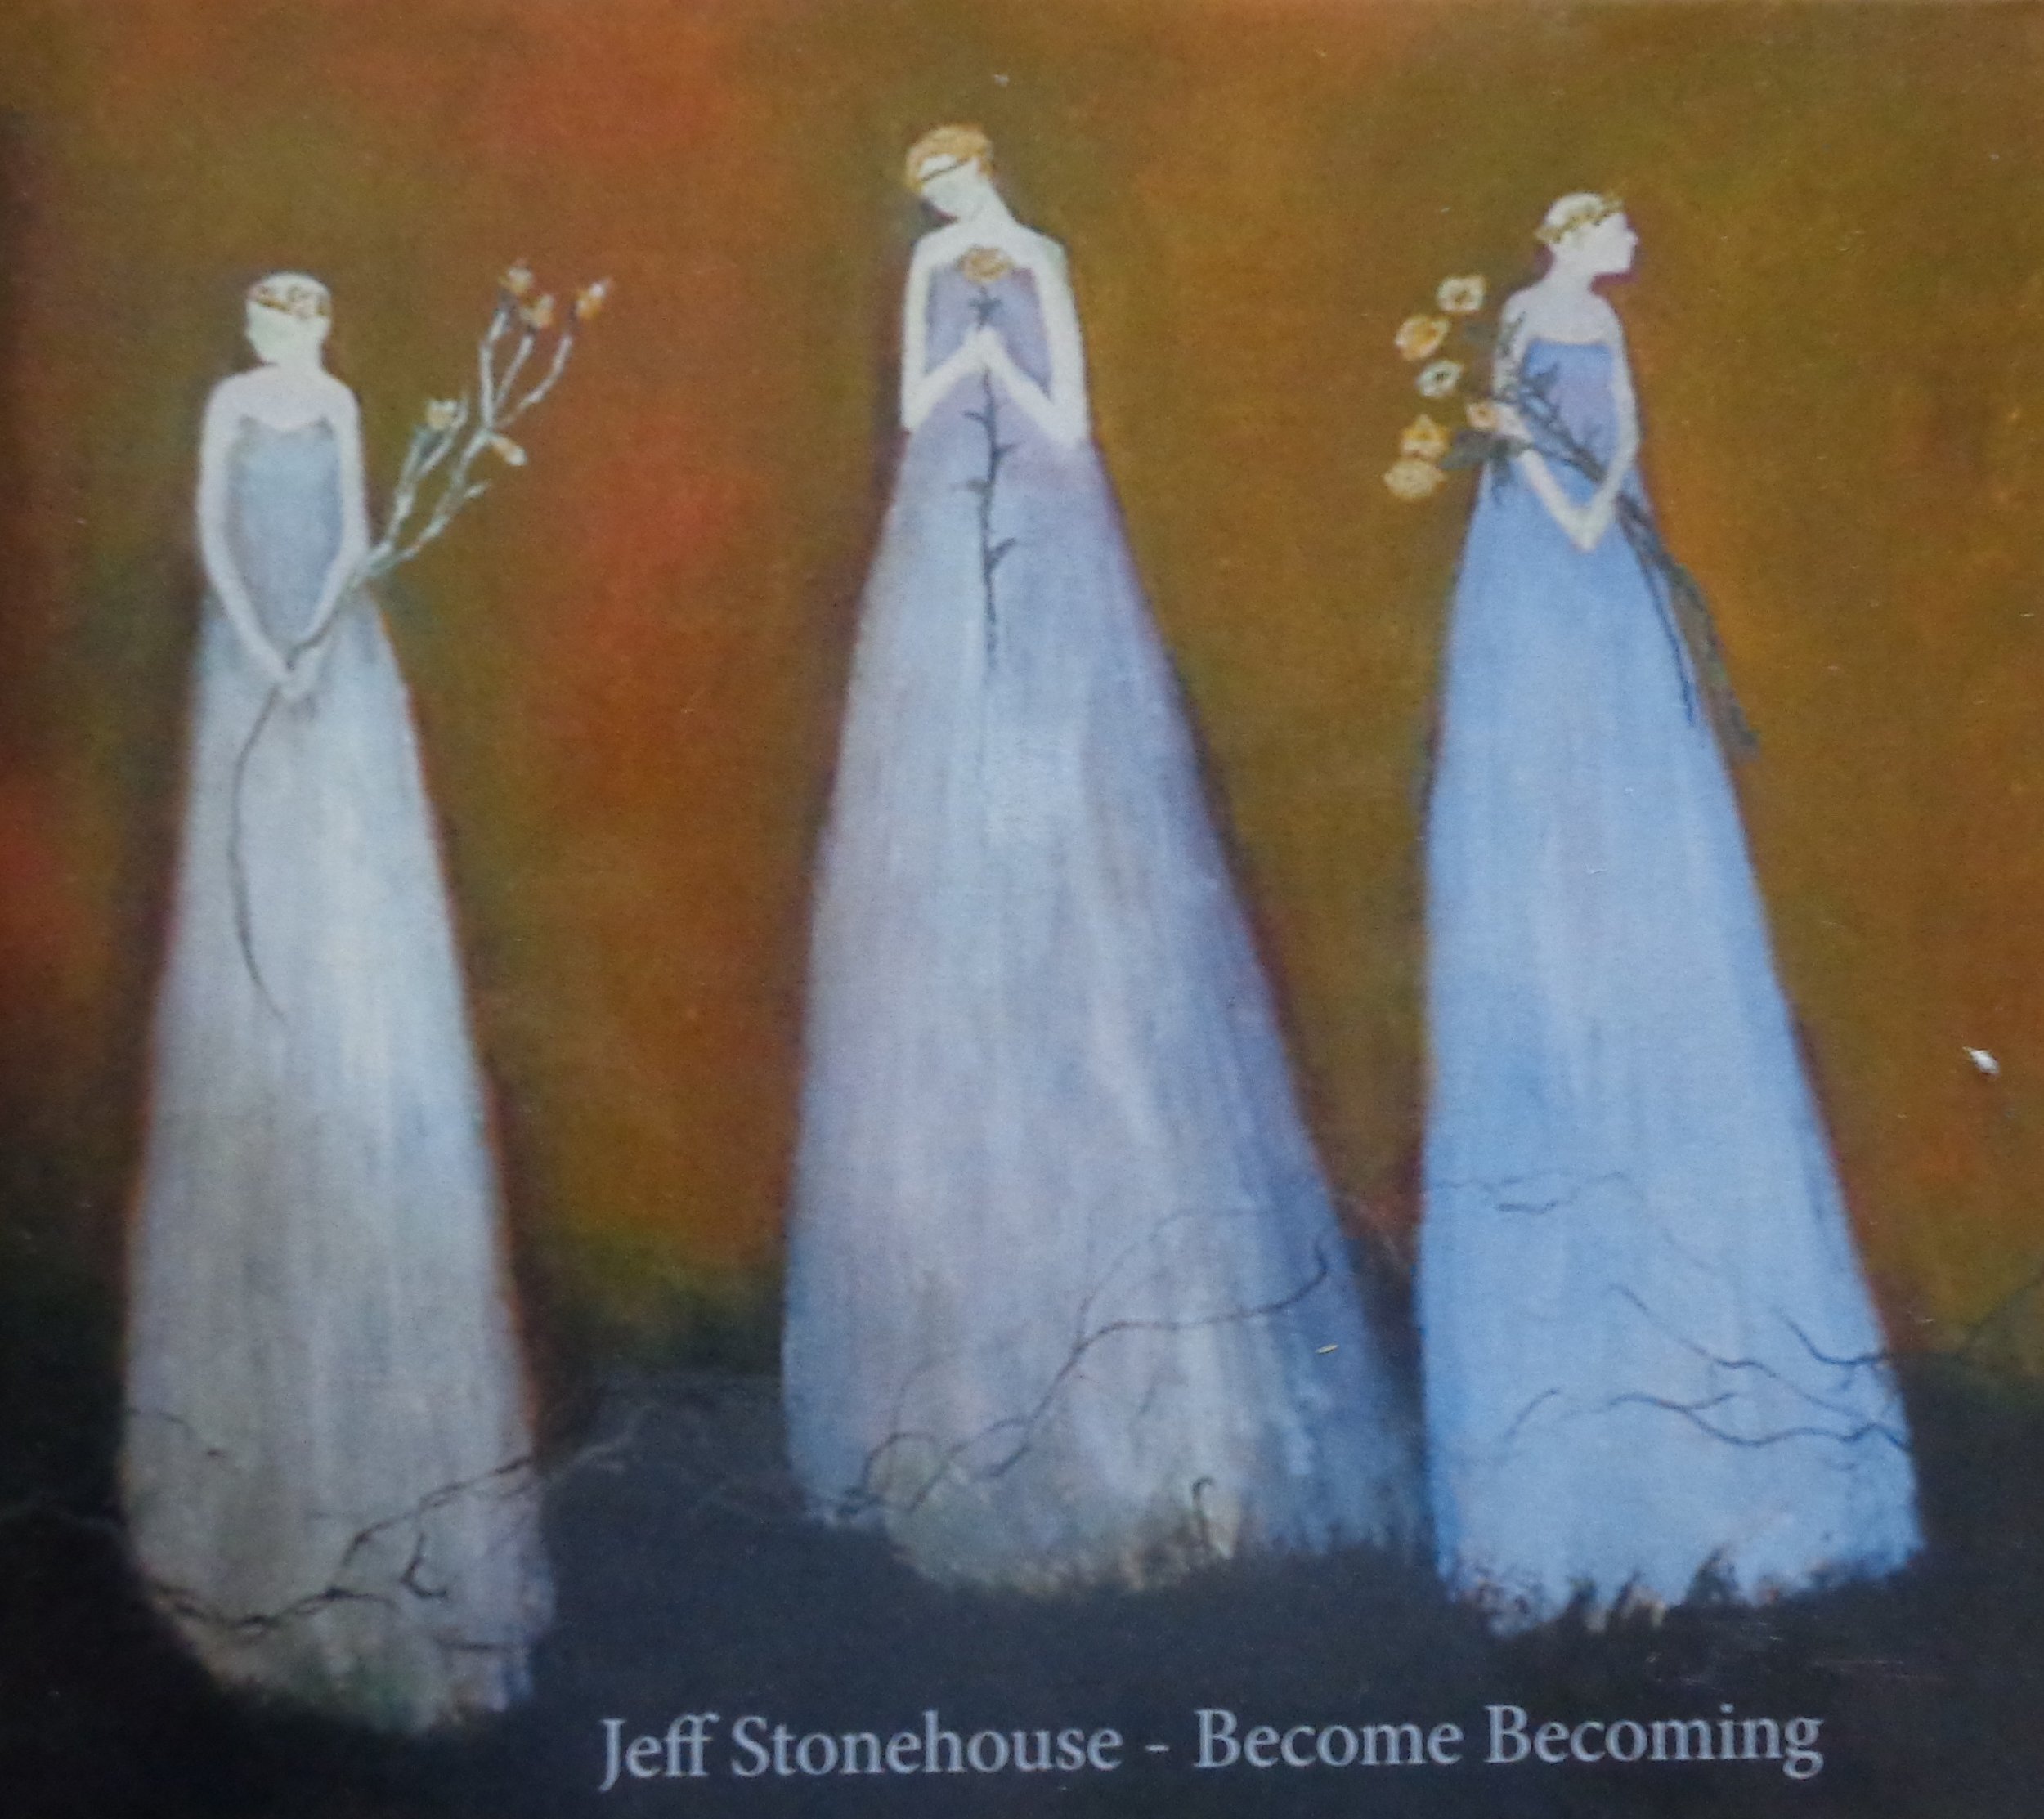 CD cover art, Become, Becoming